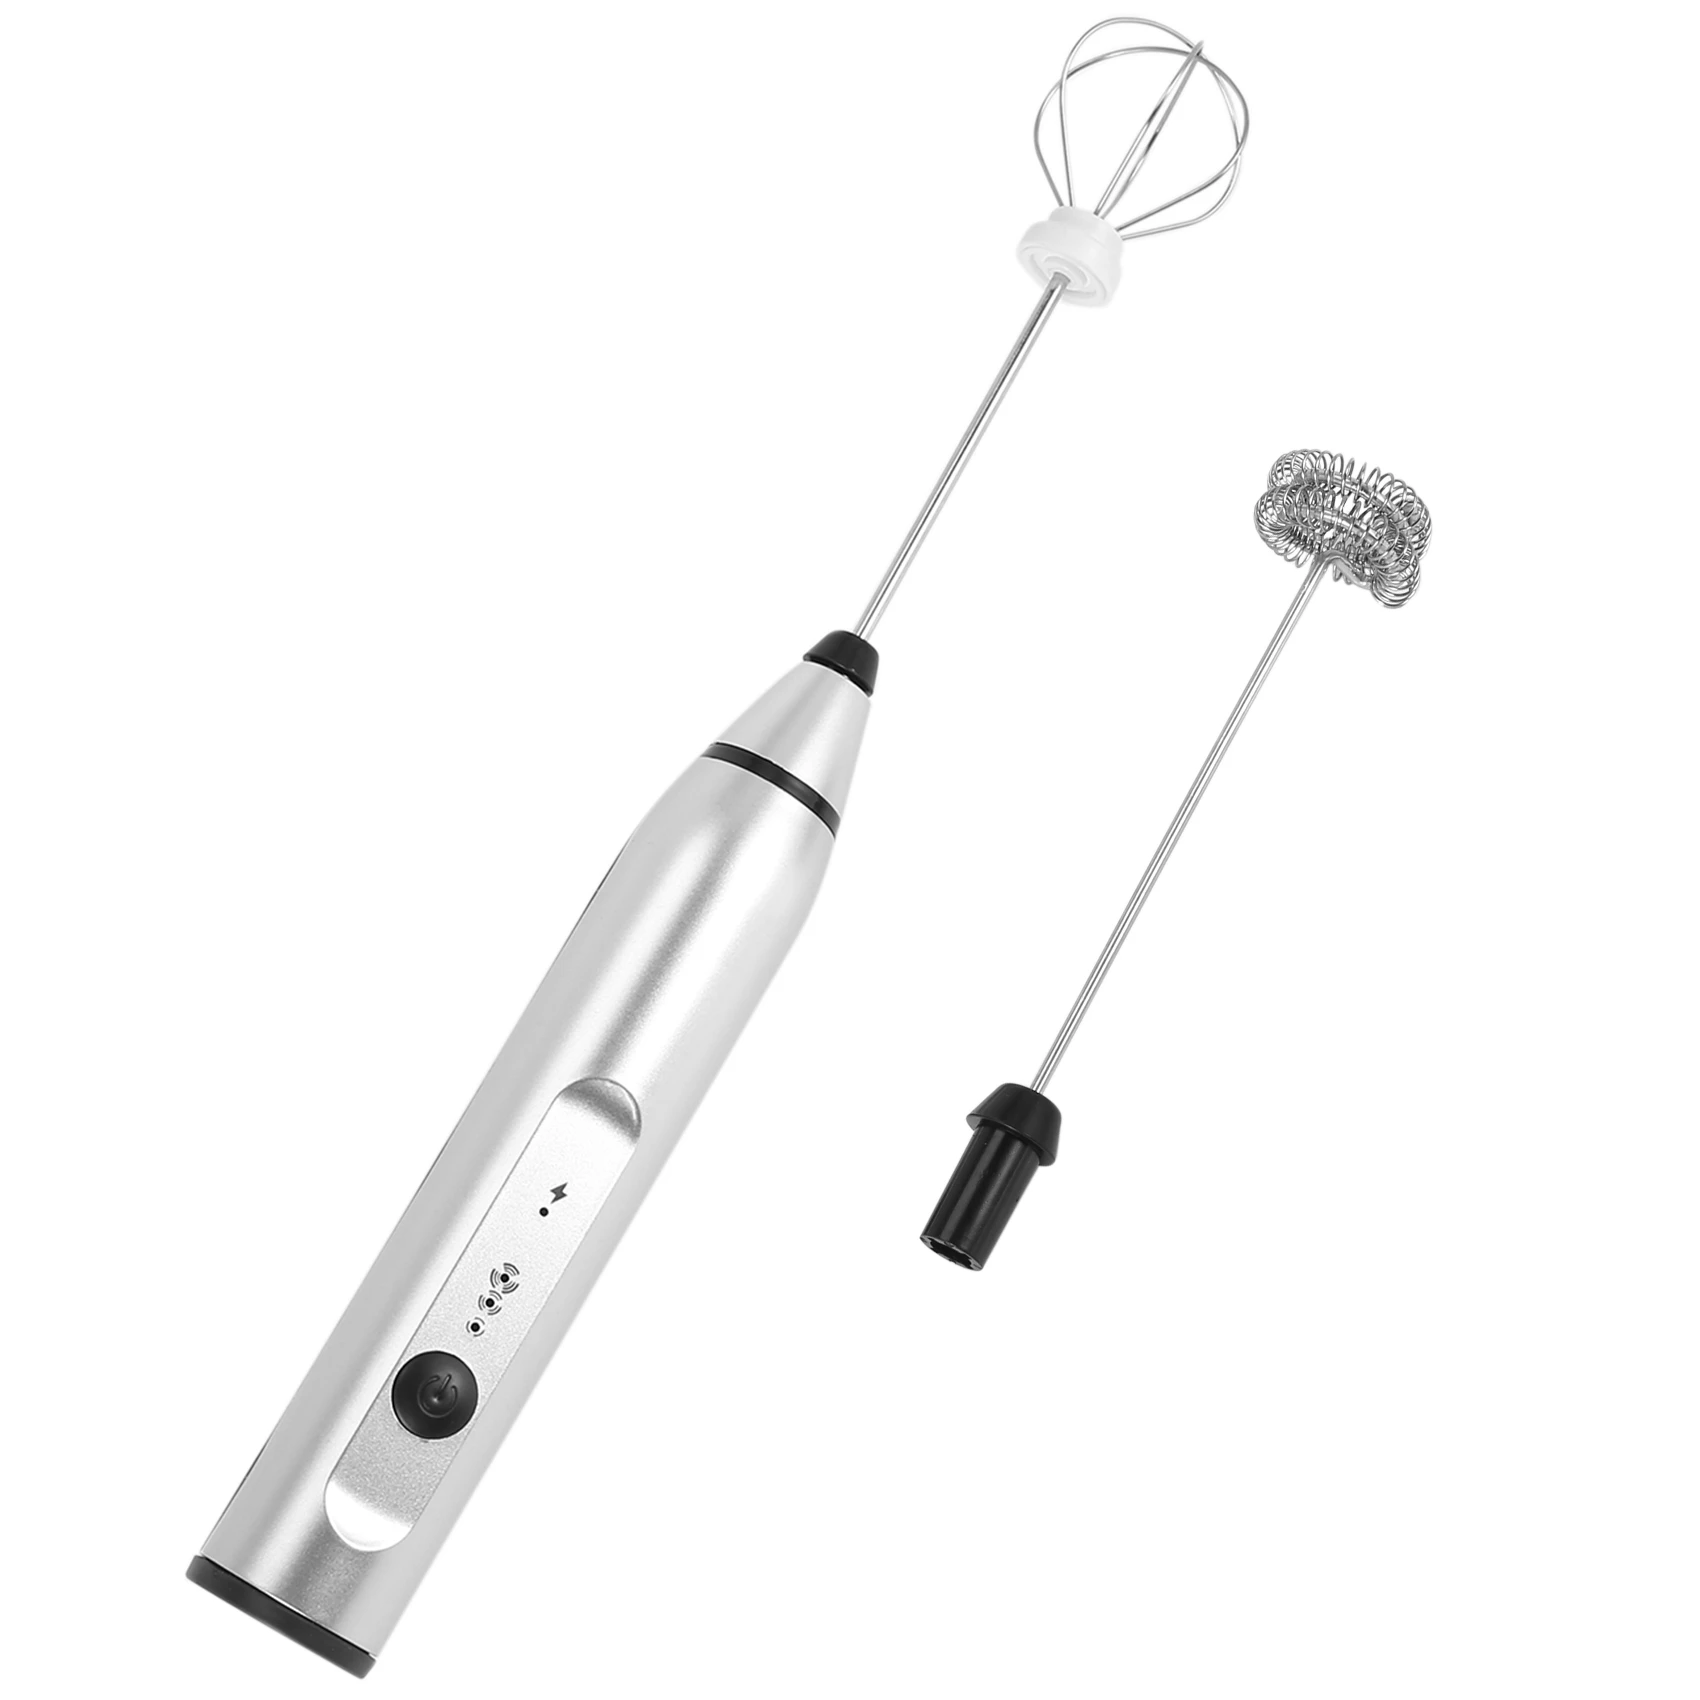 

Rechargeable Electric Milk Frother With 2 Whisks, Handheld Foam Maker For Coffee, Latte, Cappuccino, Hot Chocolate, Dura